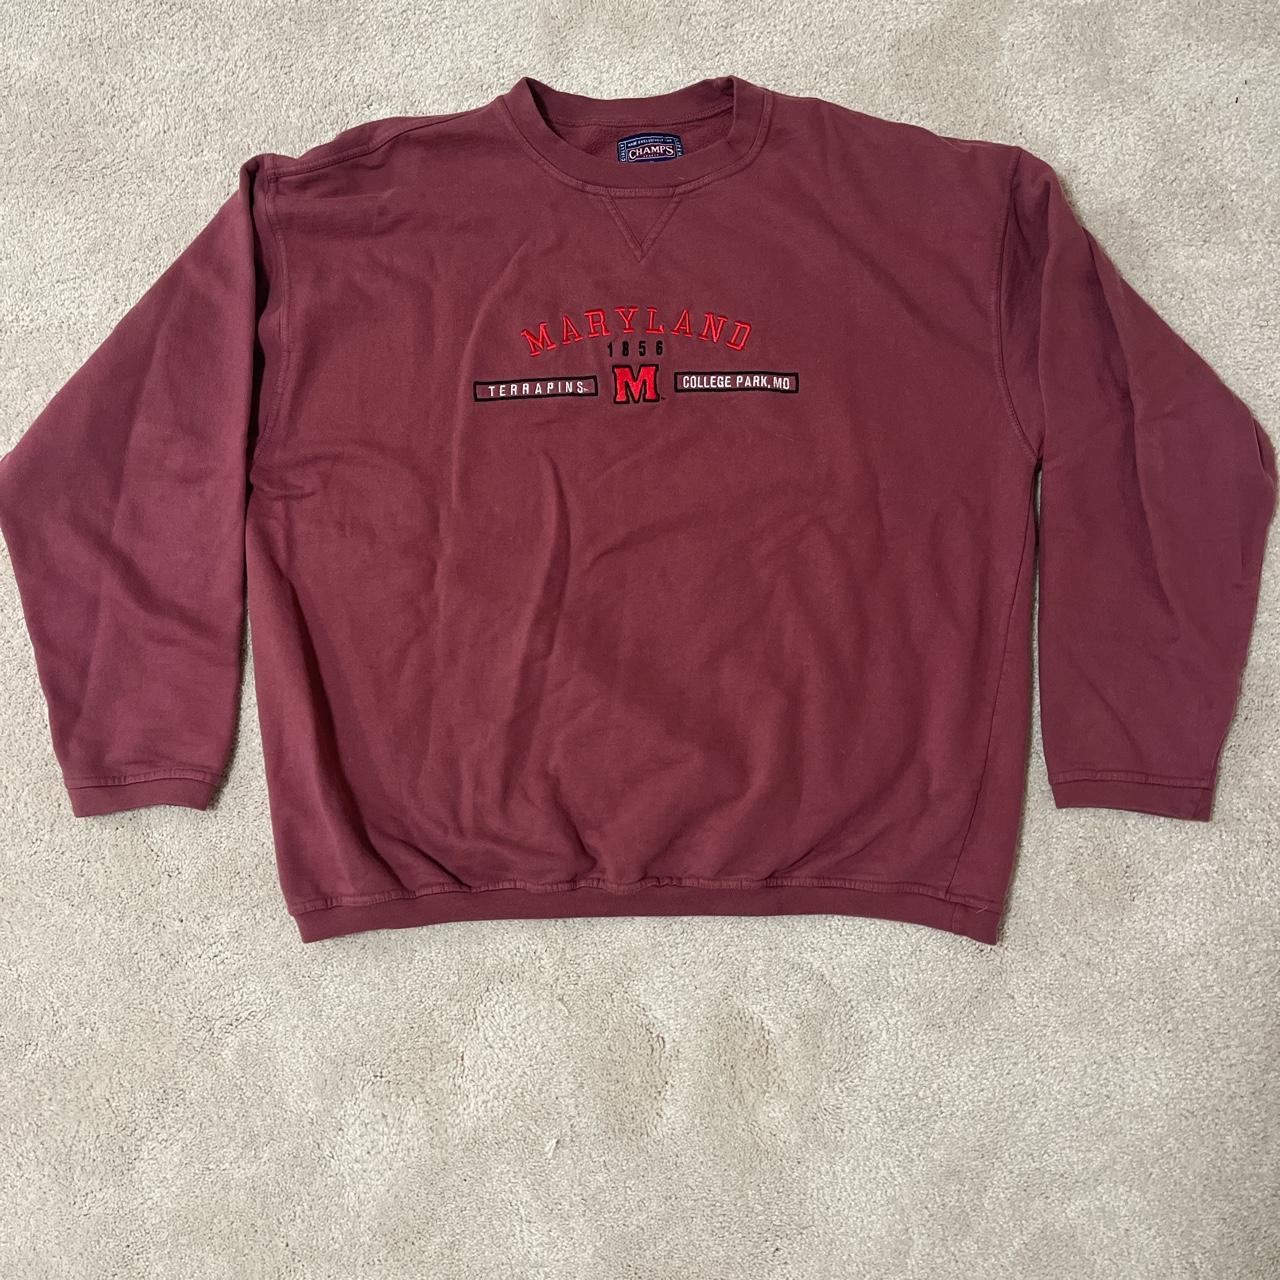 Champs Sports Men's Burgundy and Red Sweatshirt